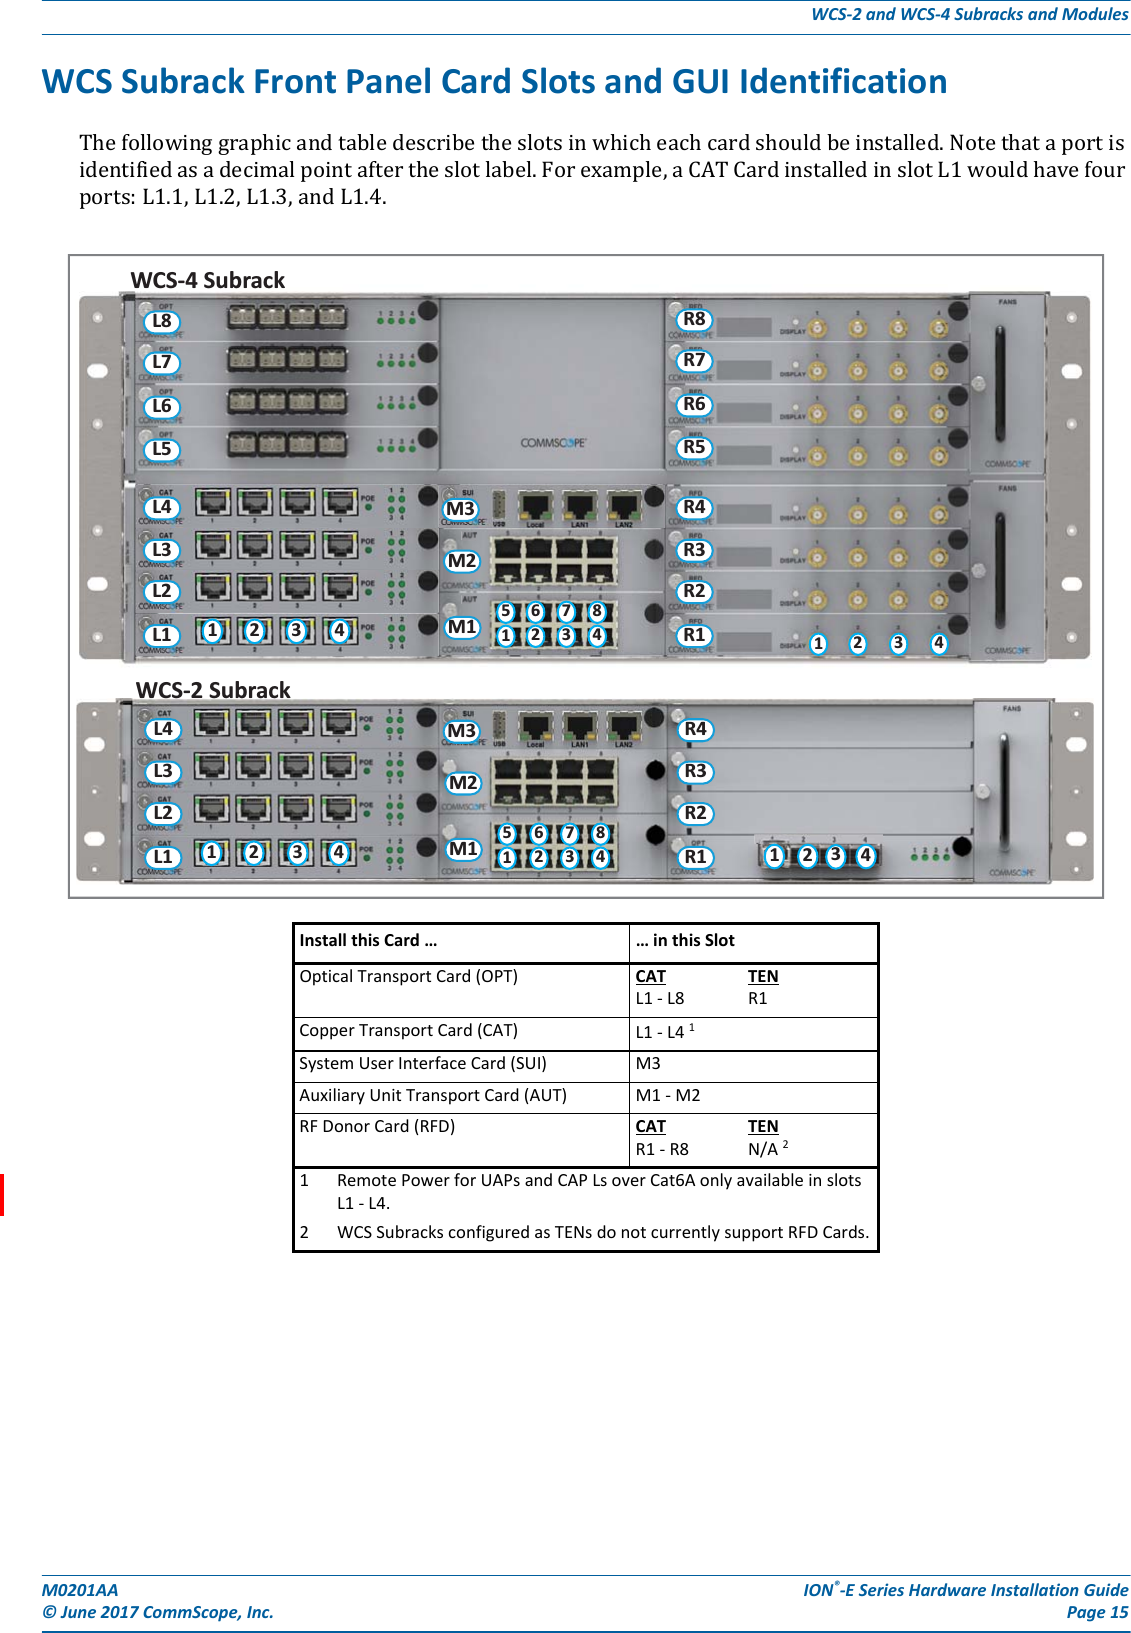 M0201AA ION®-E Series Hardware Installation Guide© June 2017 CommScope, Inc. Page 15WCS-2 and WCS-4 Subracks and ModulesWCS Subrack Front Panel Card Slots and GUI IdentificationThefollowinggraphicandtabledescribetheslotsinwhicheachcardshouldbeinstalled.Notethataportisidentifiedasadecimalpointaftertheslotlabel.Forexample,aCATCardinstalledinslotL1wouldhavefourports:L1.1,L1.2,L1.3,andL1.4.Install this Card … … in this SlotOptical Transport Card (OPT) CAT TENL1 - L8 R1 Copper Transport Card (CAT) L1 - L4 1 System User Interface Card (SUI) M3 Auxiliary Unit Transport Card (AUT) M1 - M2 RF Donor Card (RFD) CAT TENR1 - R8 N/A 21 Remote Power for UAPs and CAP Ls over Cat6A only available in slots L1 - L4.2 WCS Subracks configured as TENs do not currently support RFD Cards.WCS-2 SubrackL4L3L2L1M3M2M112 3 451627384123R4R3R2R1 4L4L3L2L1M3M2M1WCS-4 Subrack12 3 451627384L8L7L6L5R8R7R6R5R4R3R2R1 1234